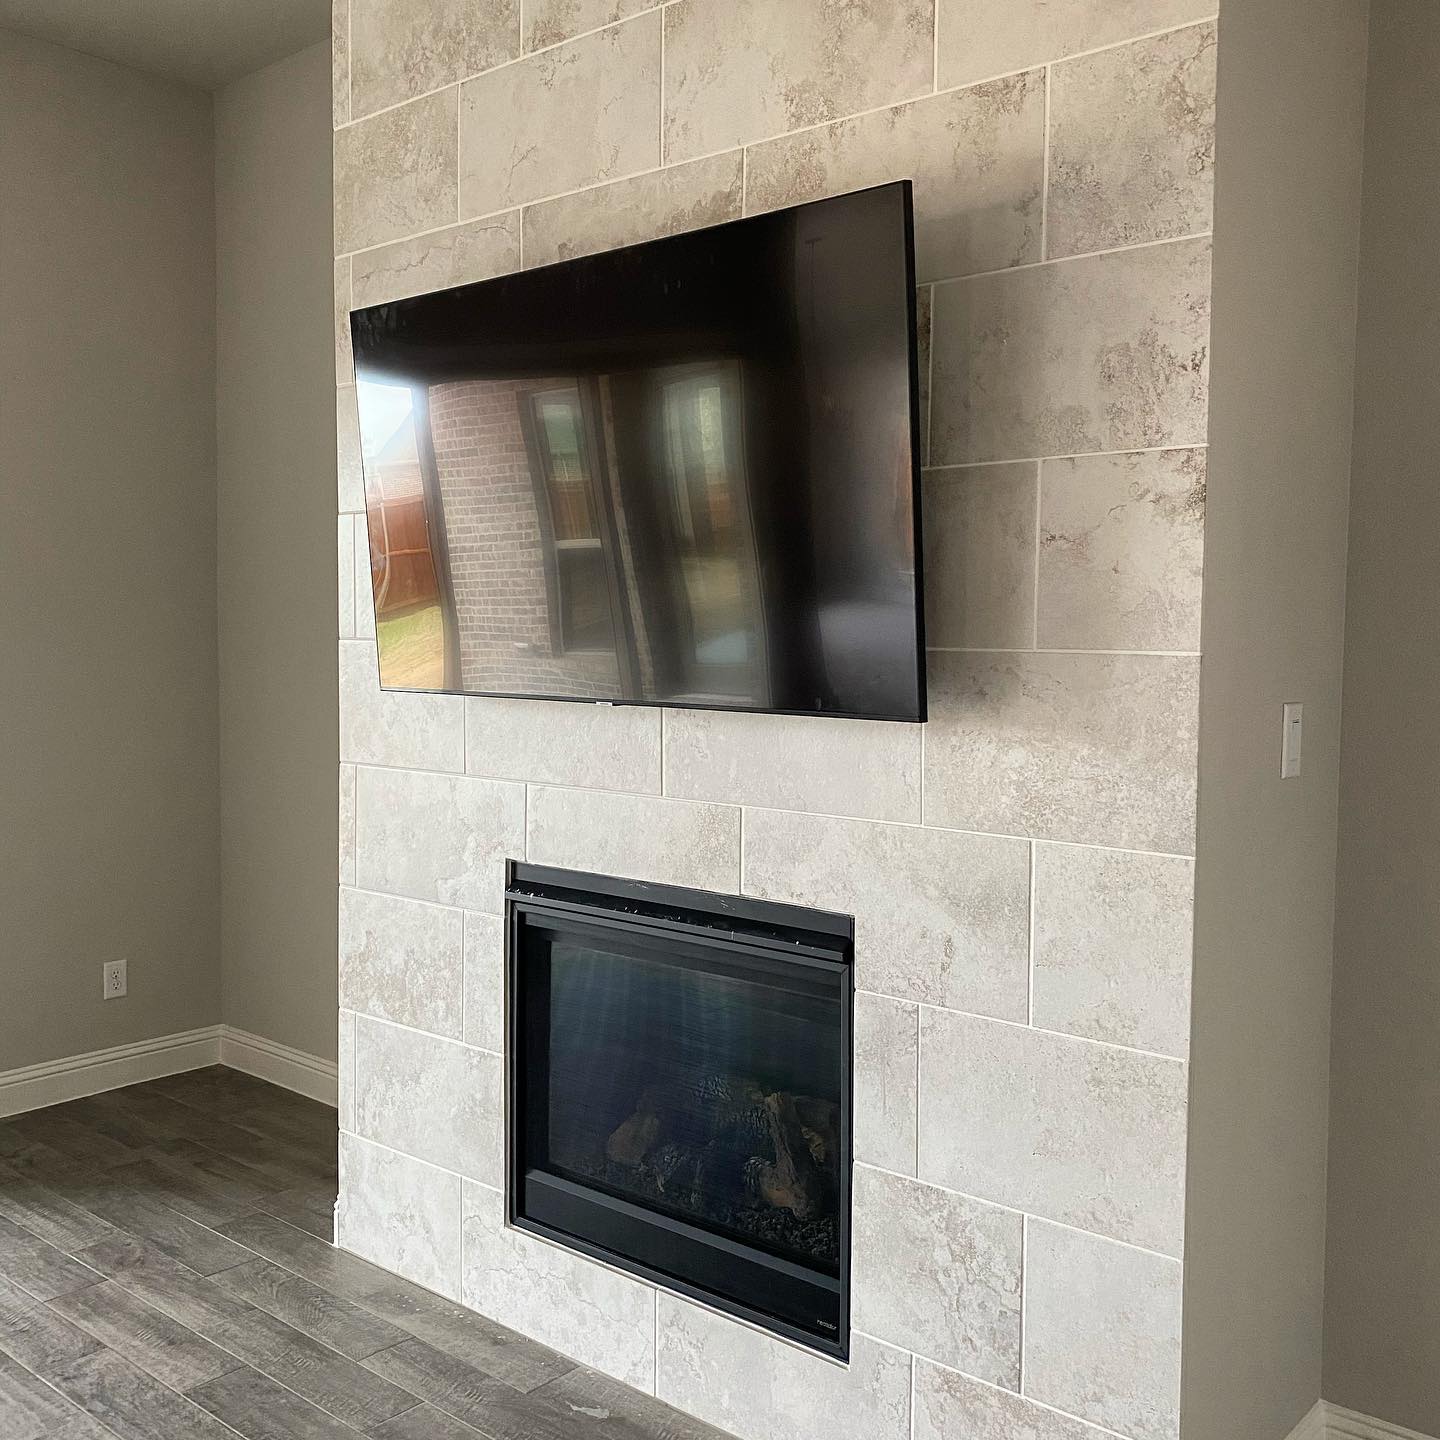 TV mount over fireplace